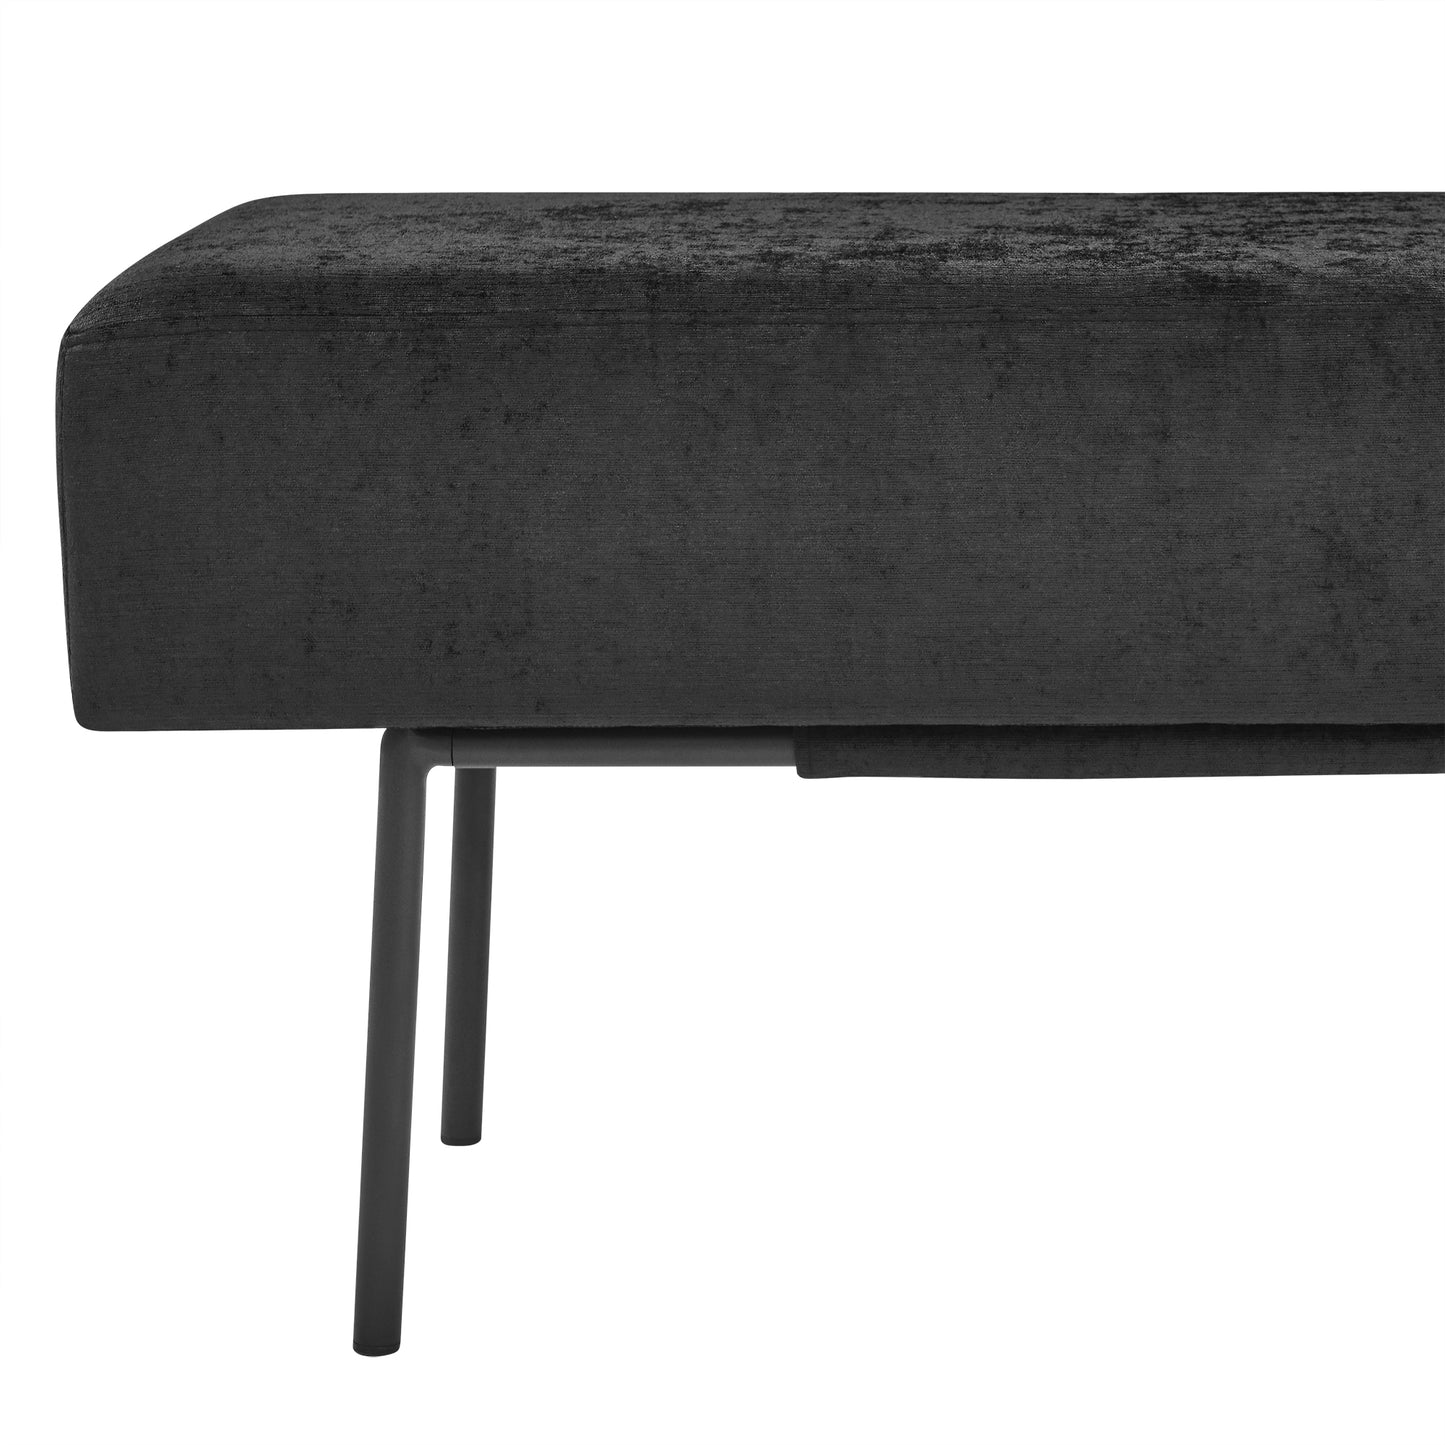 SYNGAR Entryway Bench, Fabric Upholstered Seat Footstool, Rectangular End of Bed Bench with Metal Legs, Ottoman Bench Seat for Bedroom Living Room Hallway, Modern Home Furniture Bed Bench, Black